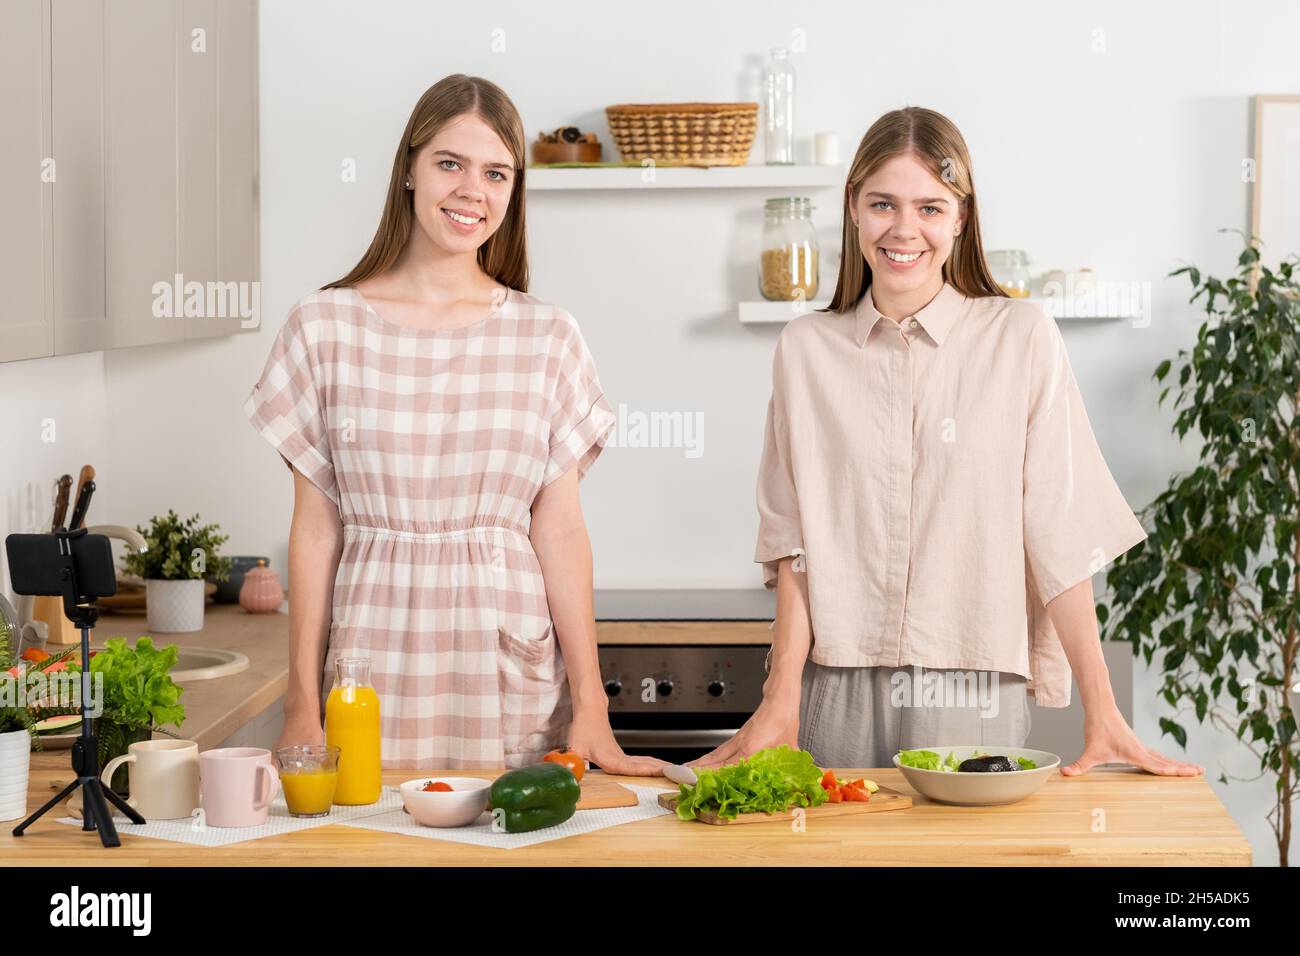 Happy young twin sisters in casualwear standing by kitchen table and looking at camera while cooking vegetarian food Stock Photo